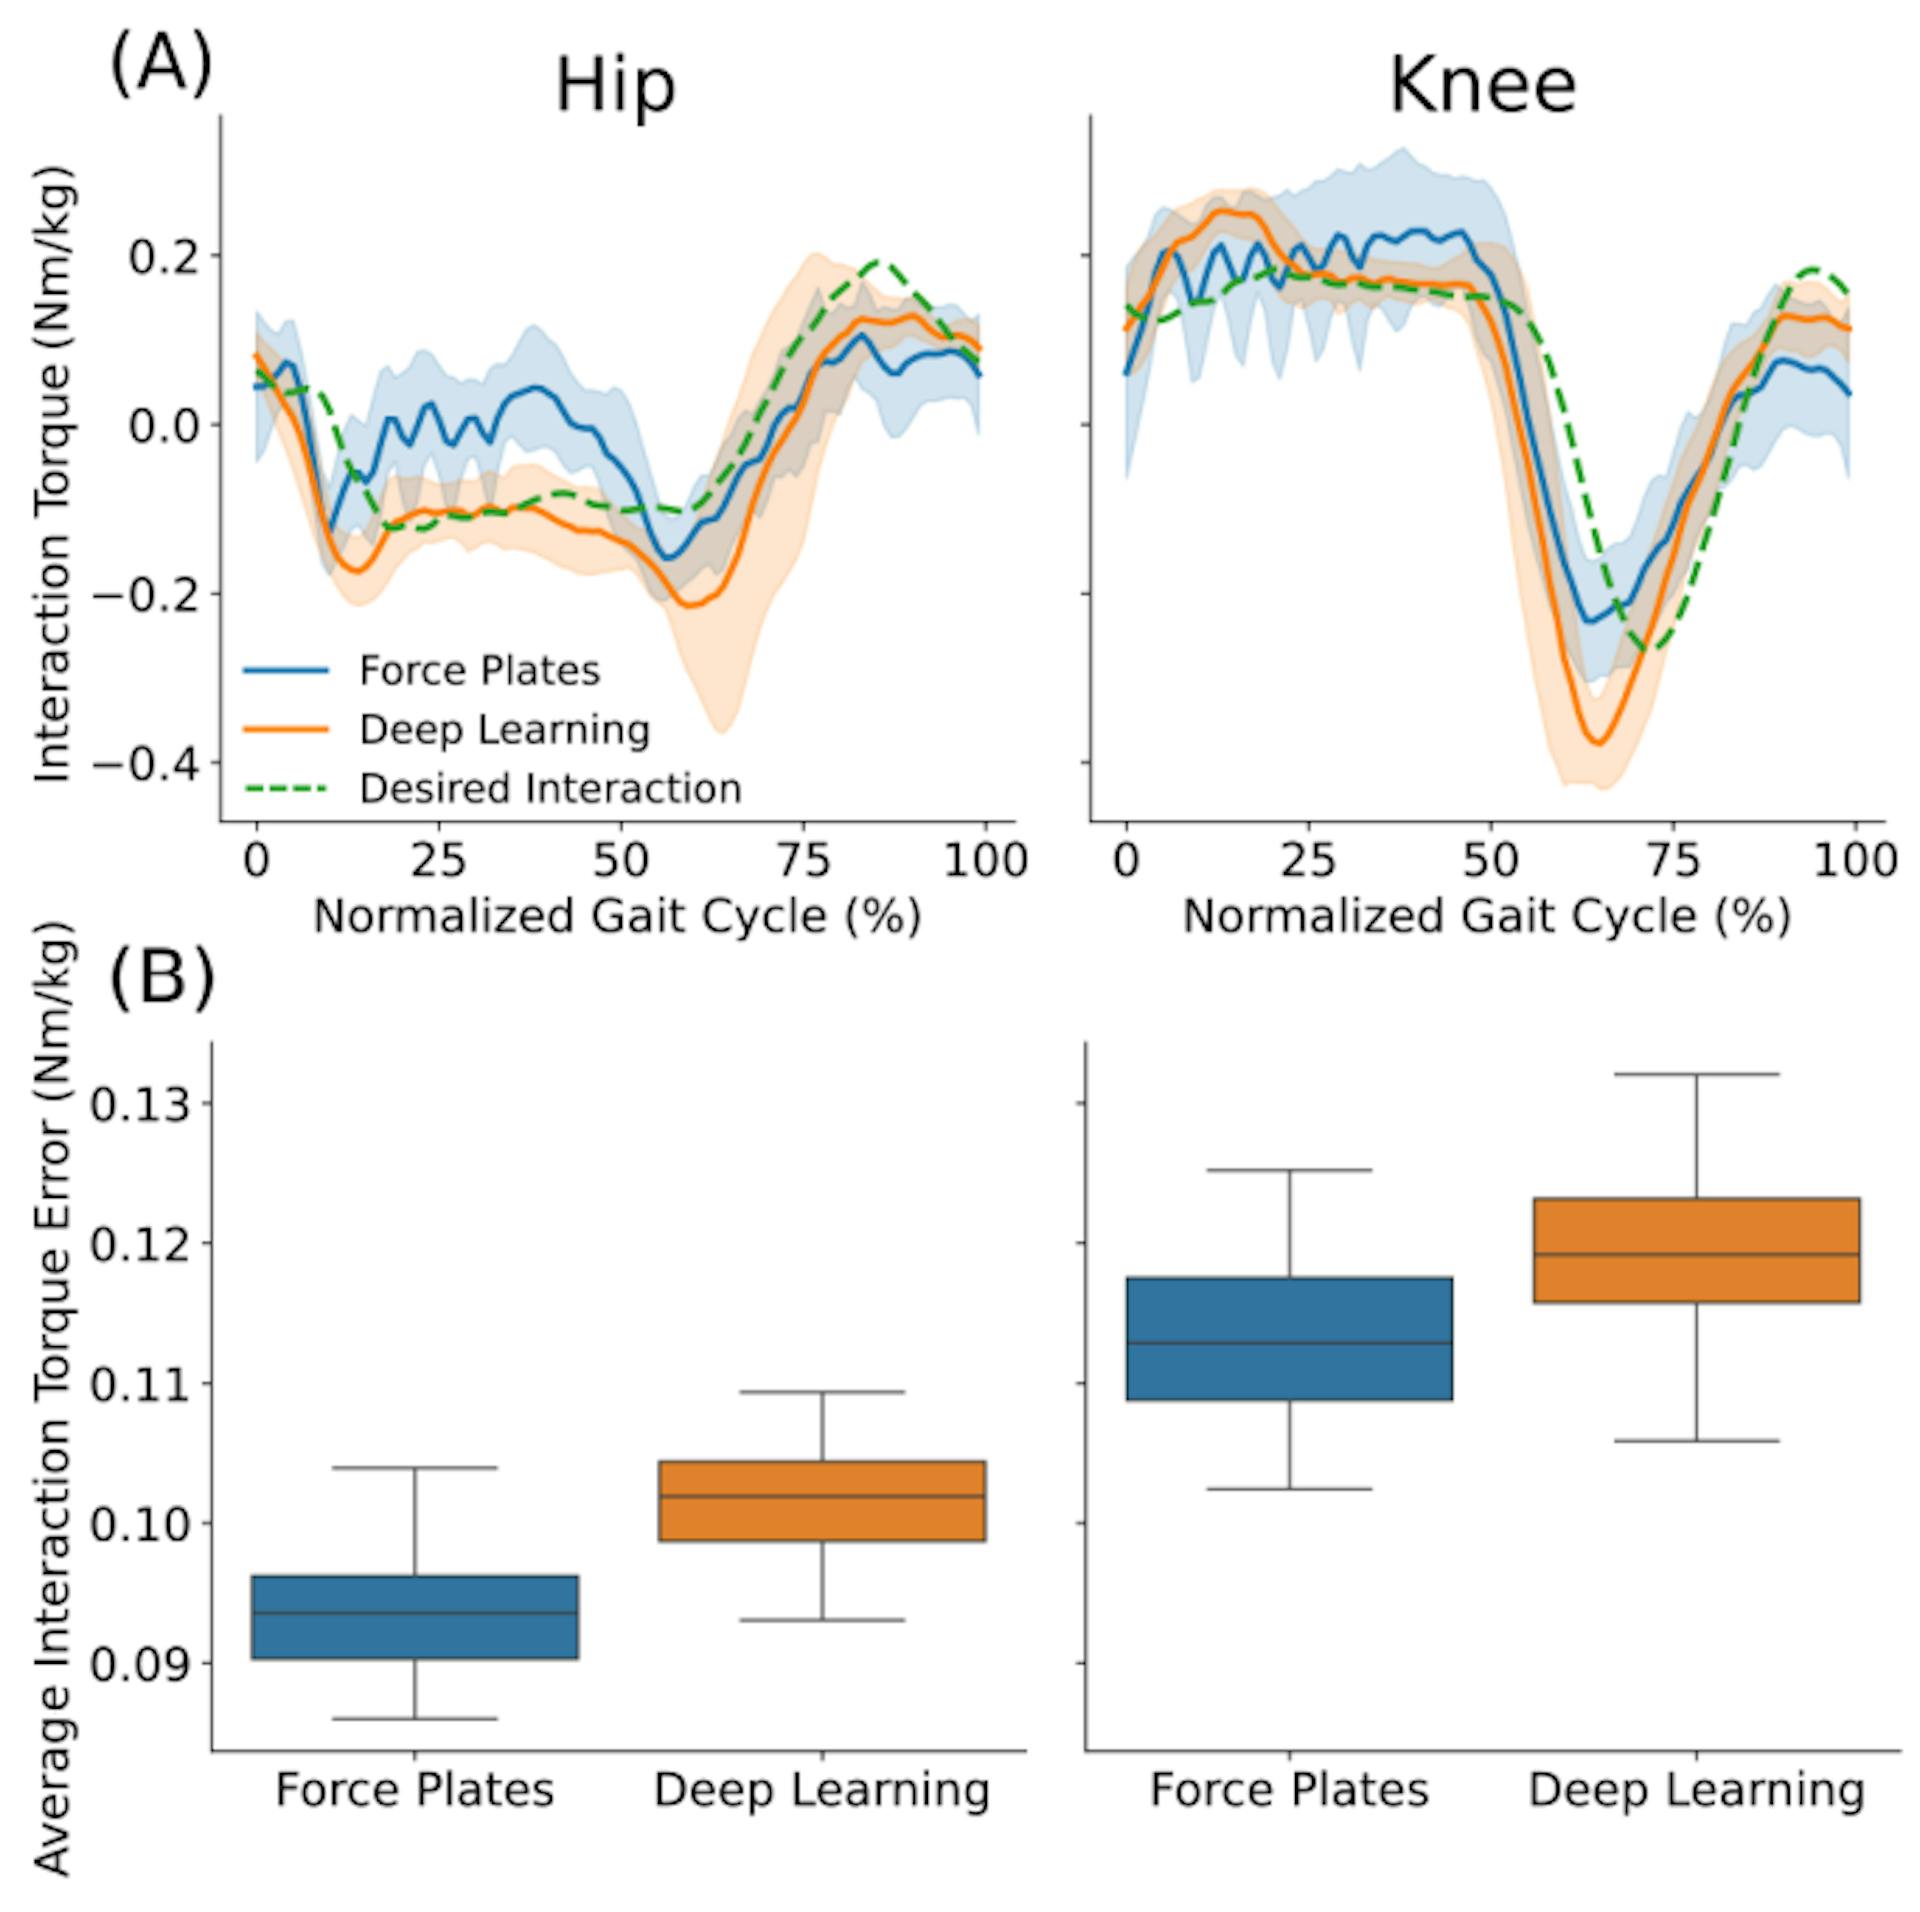 Fig. 5: Haptic rendering performance of the proposed deep-learning method during treadmill walking. (A) Interaction torque across normalized gait cycle for a representative user, walking at 0.25 m/s. The interaction torque highlights haptic rendering performances using treadmill force plates (blue) or deep-learning estimation (orange). Shaded error bars indicate ± one standard deviation relative to the mean. Desired Interaction (in green) contains data from both treadmill force plates and deep-learning conditions. (B) Mean interaction torque error per step, for three users walking at 0.25 m/s. The boxplot shows highlights the interaction torque error in treadmill force plates and deep-learning conditions across users.